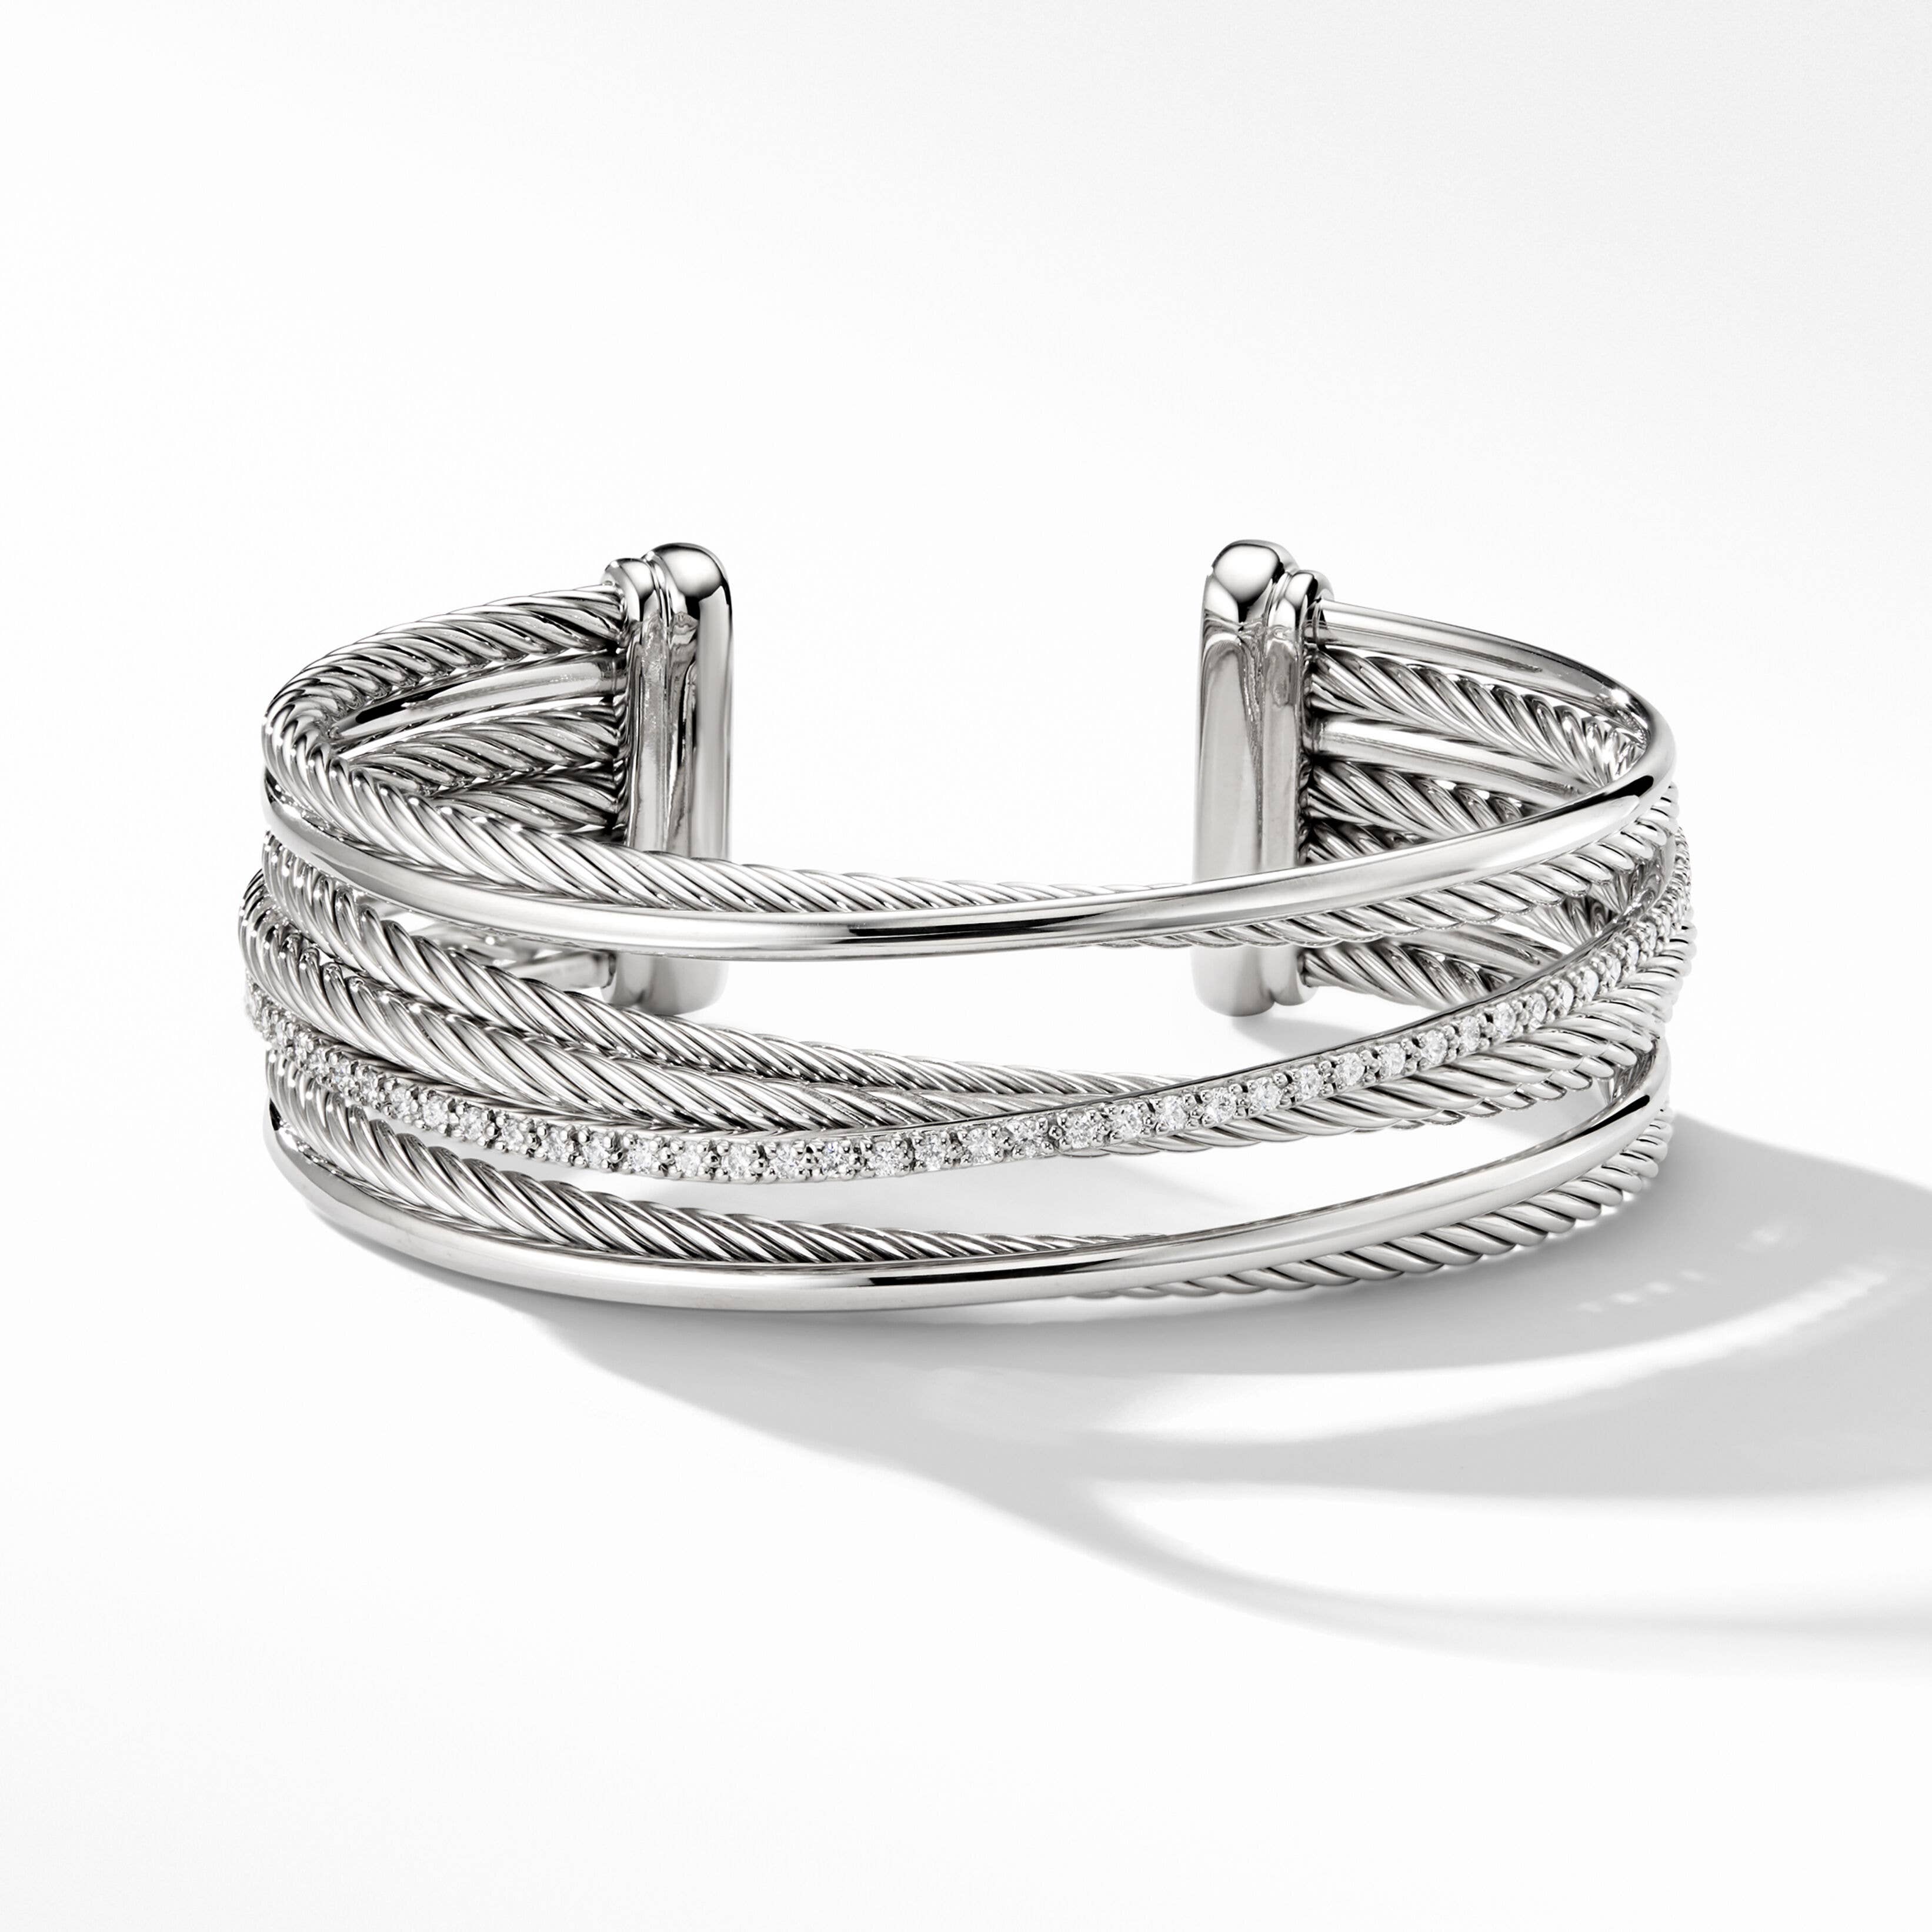 Crossover Four Row Cuff Bracelet in Sterling Silver with Pavé Diamonds